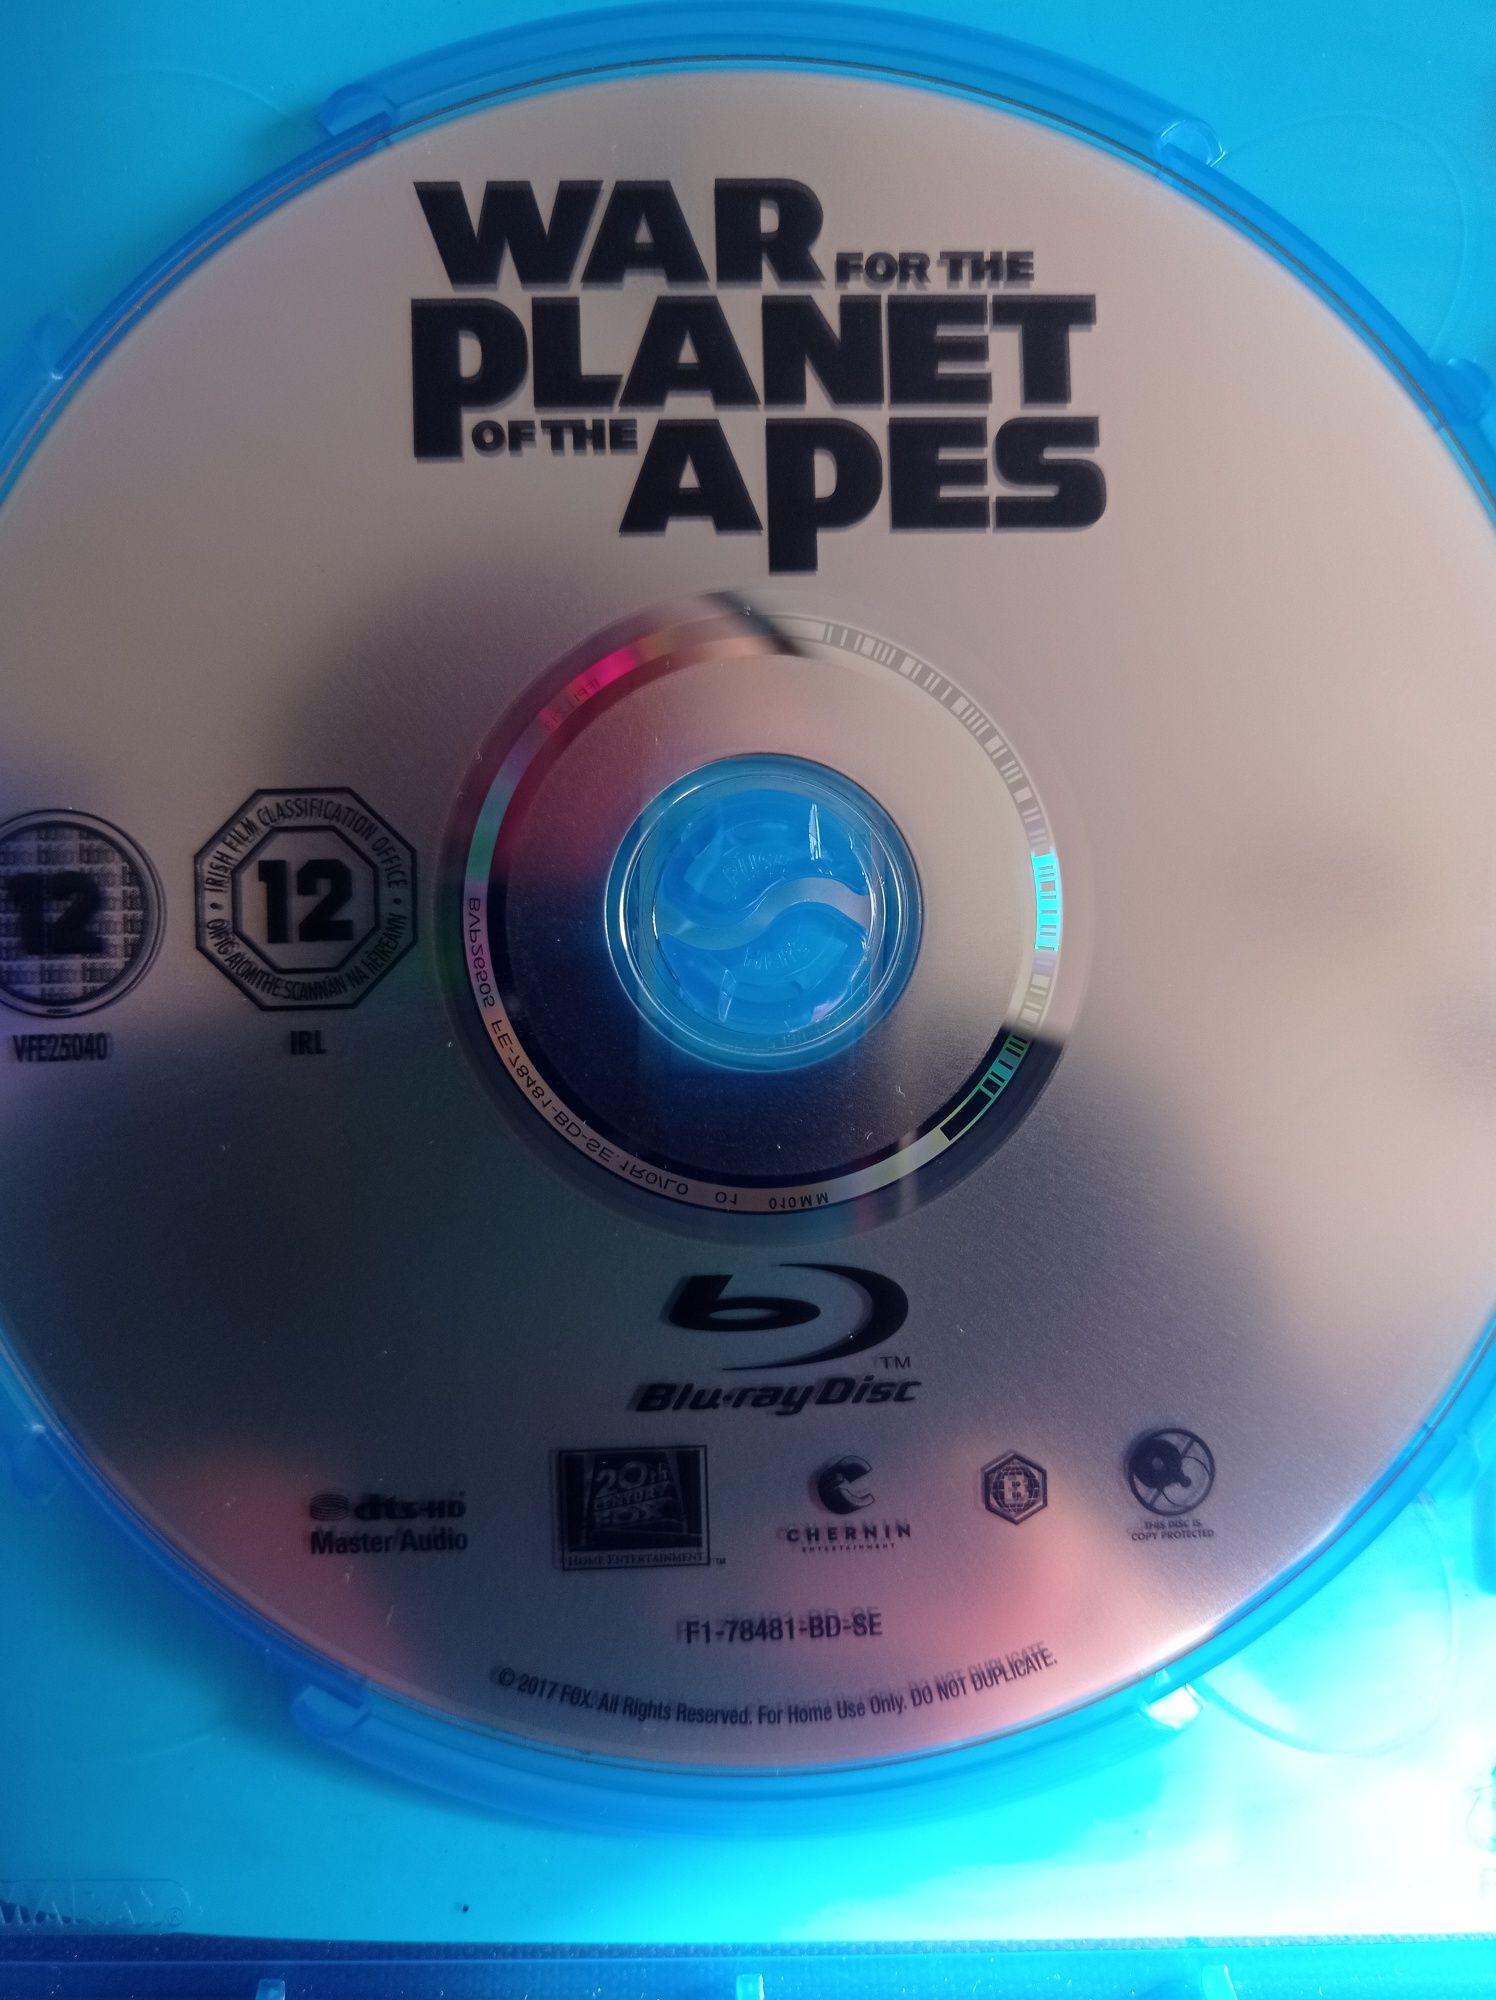 Wojna o planetę małp 2017 War For The Planet Of The Apes Blu ray